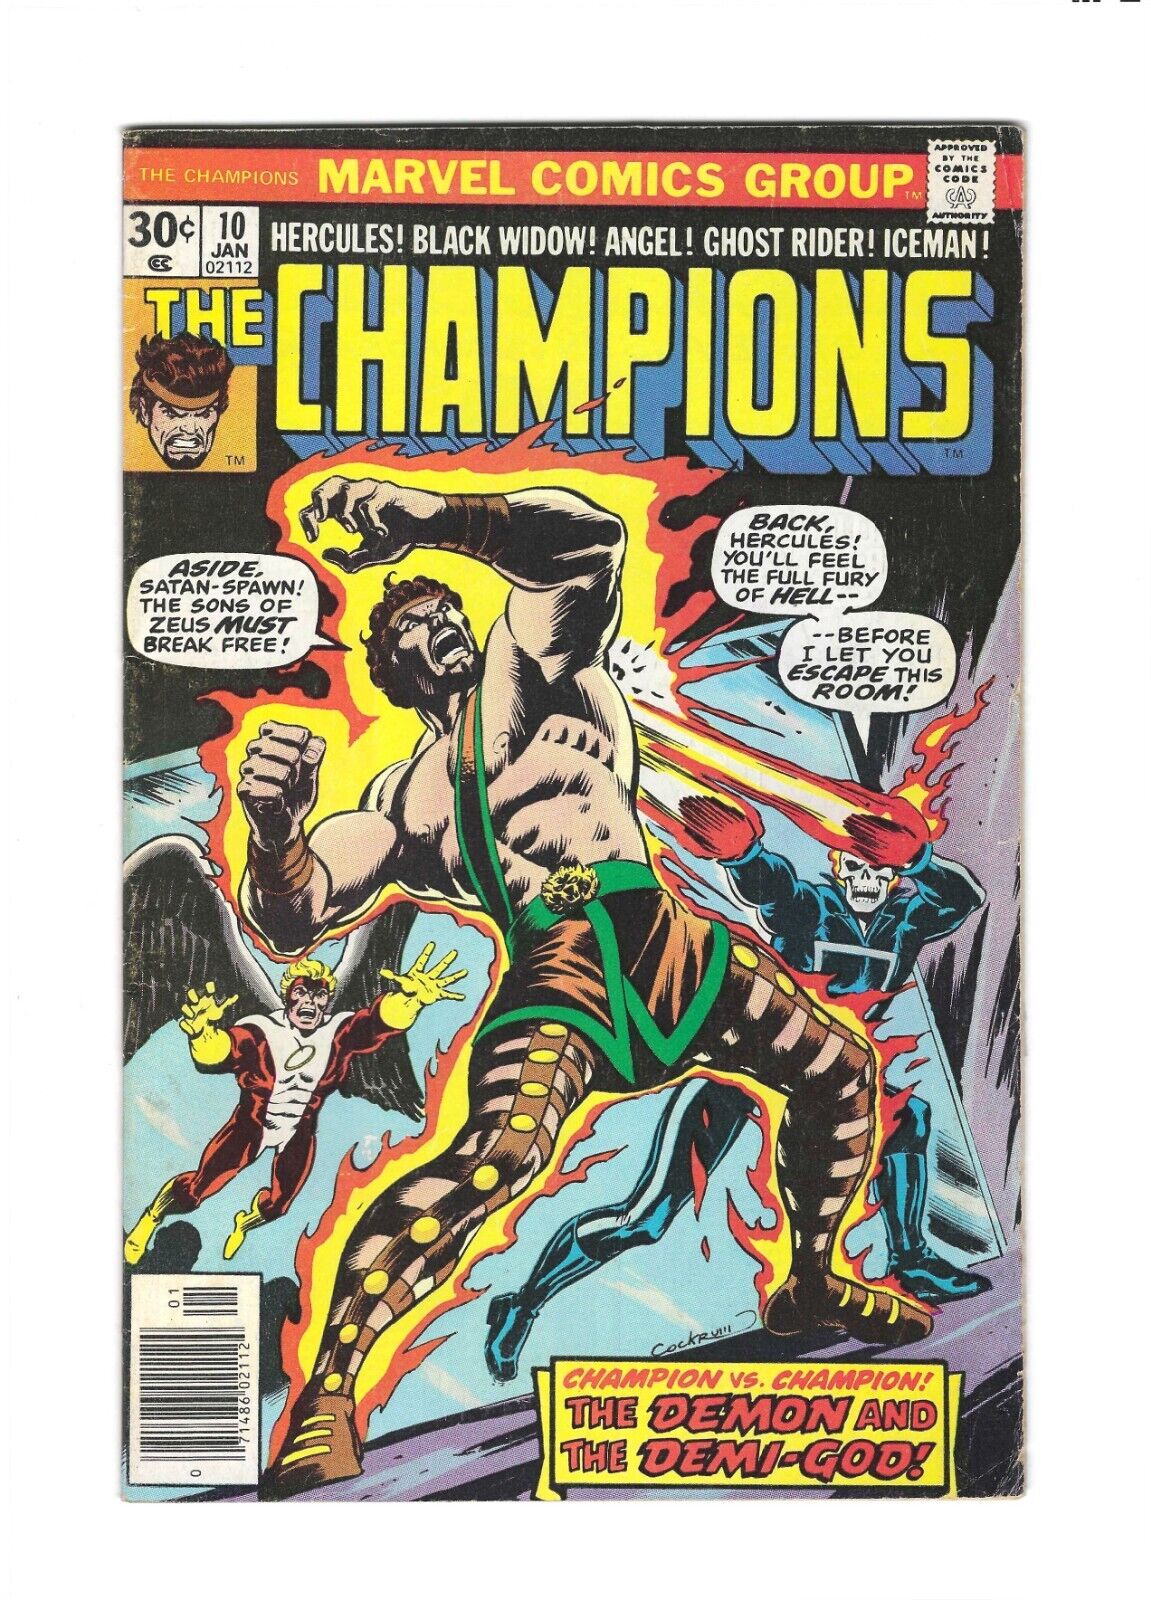 The Champions #10: Dry Cleaned: Pressed: Bagged: Boarded: VG 4.0